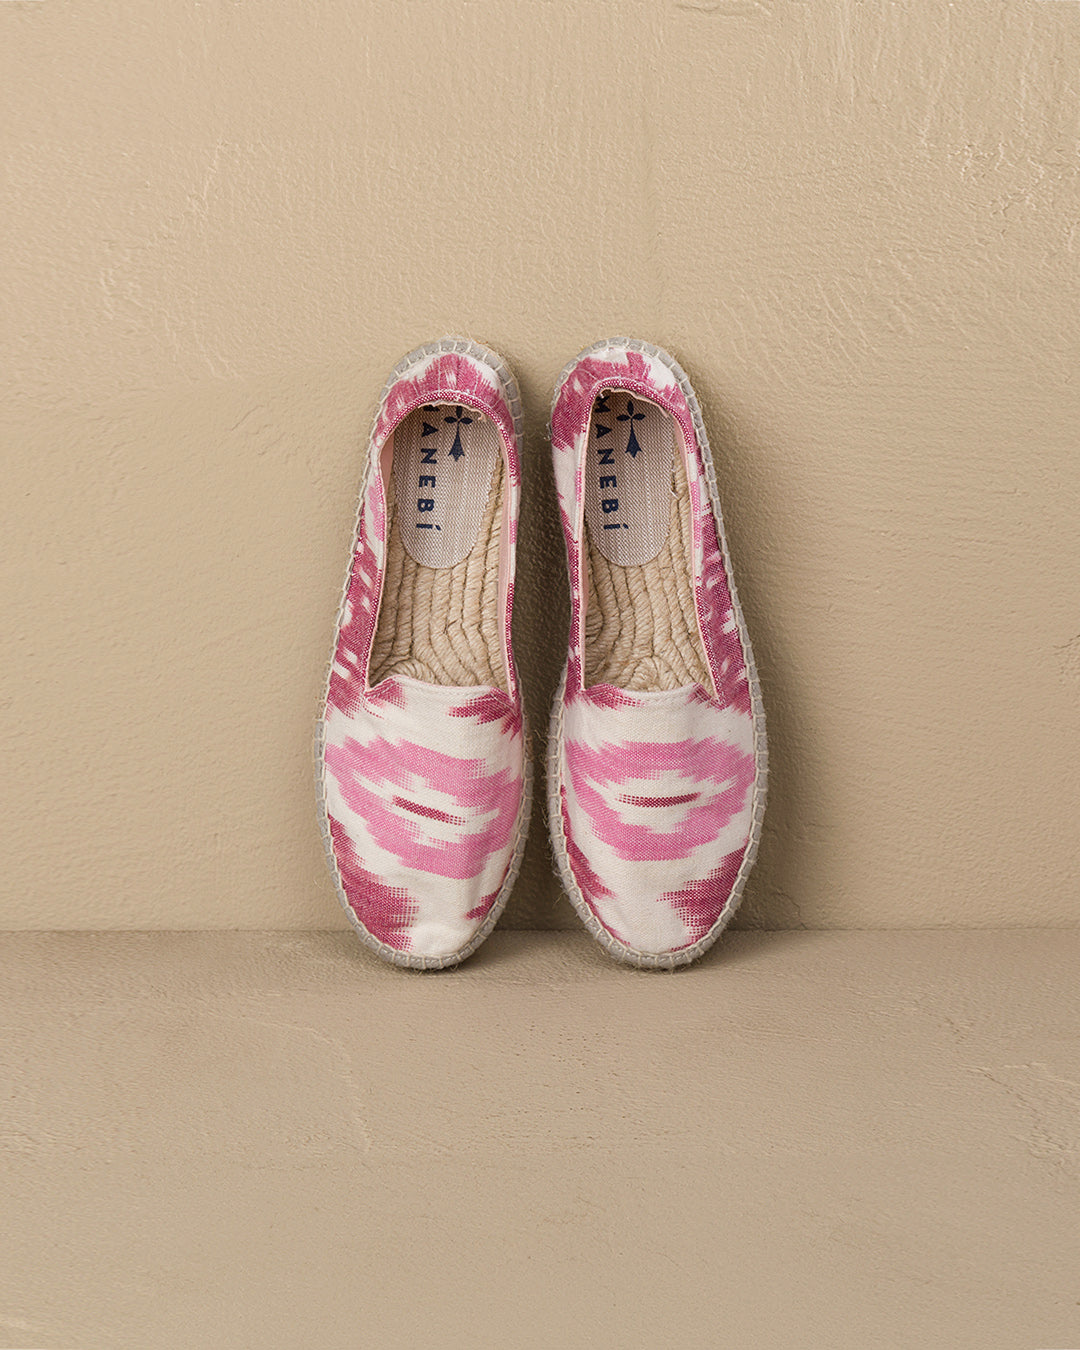 Dyed Cotton Flat Espadrilles - Tulum Pink And White Ikat